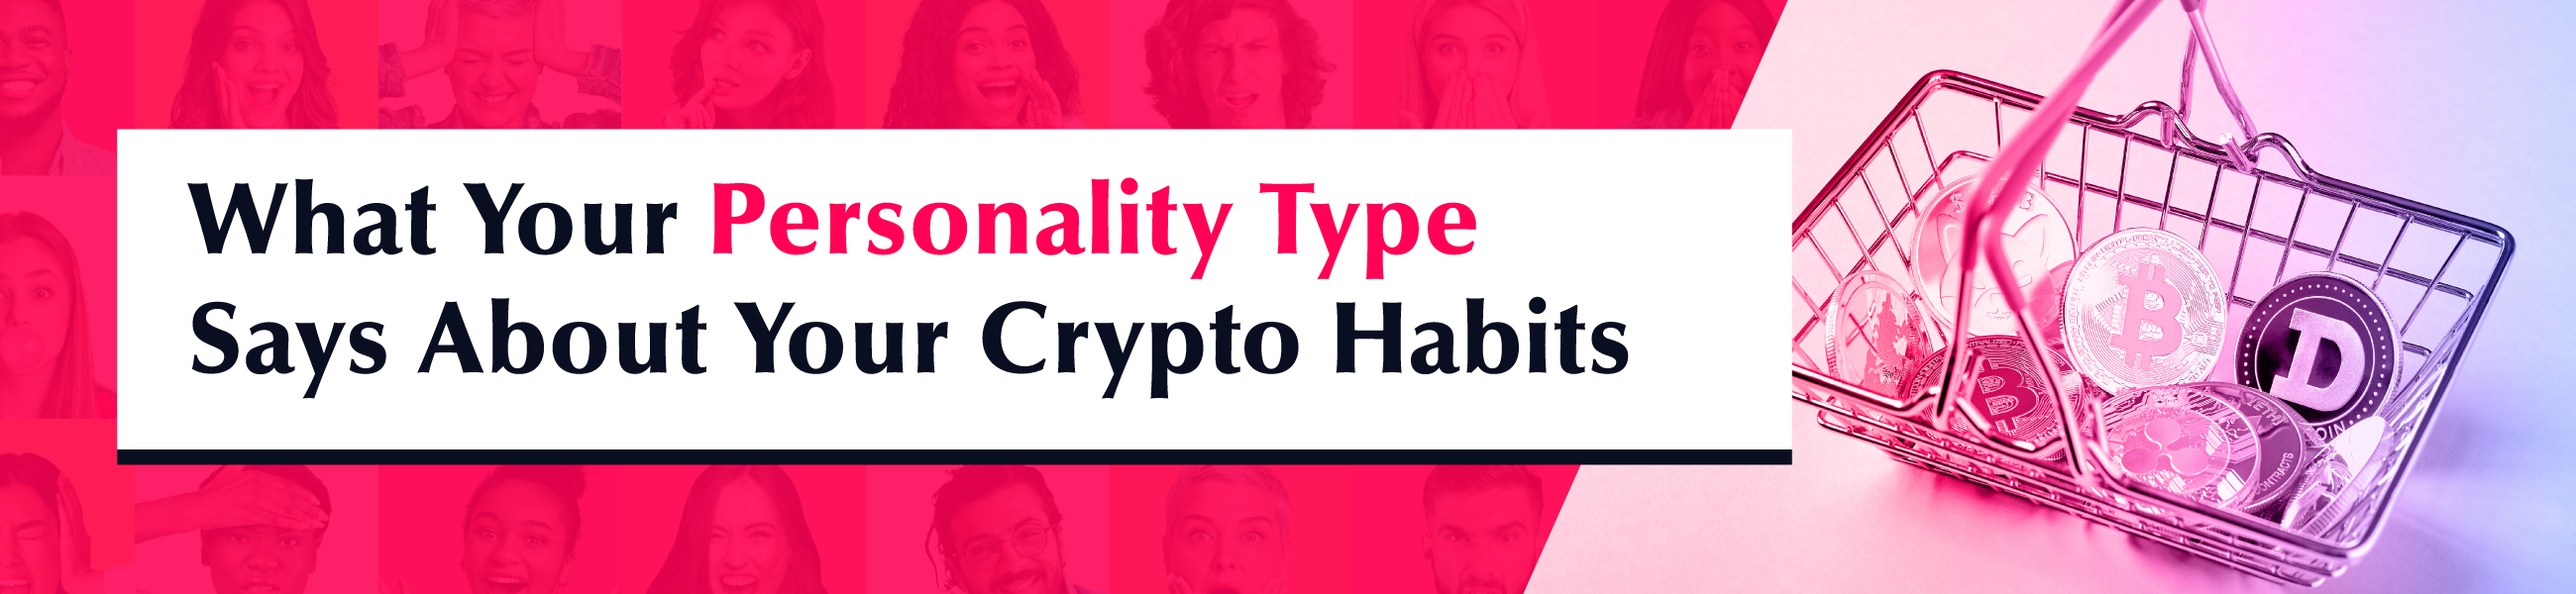 What Your Personality Type Says About Your Crypto Habits